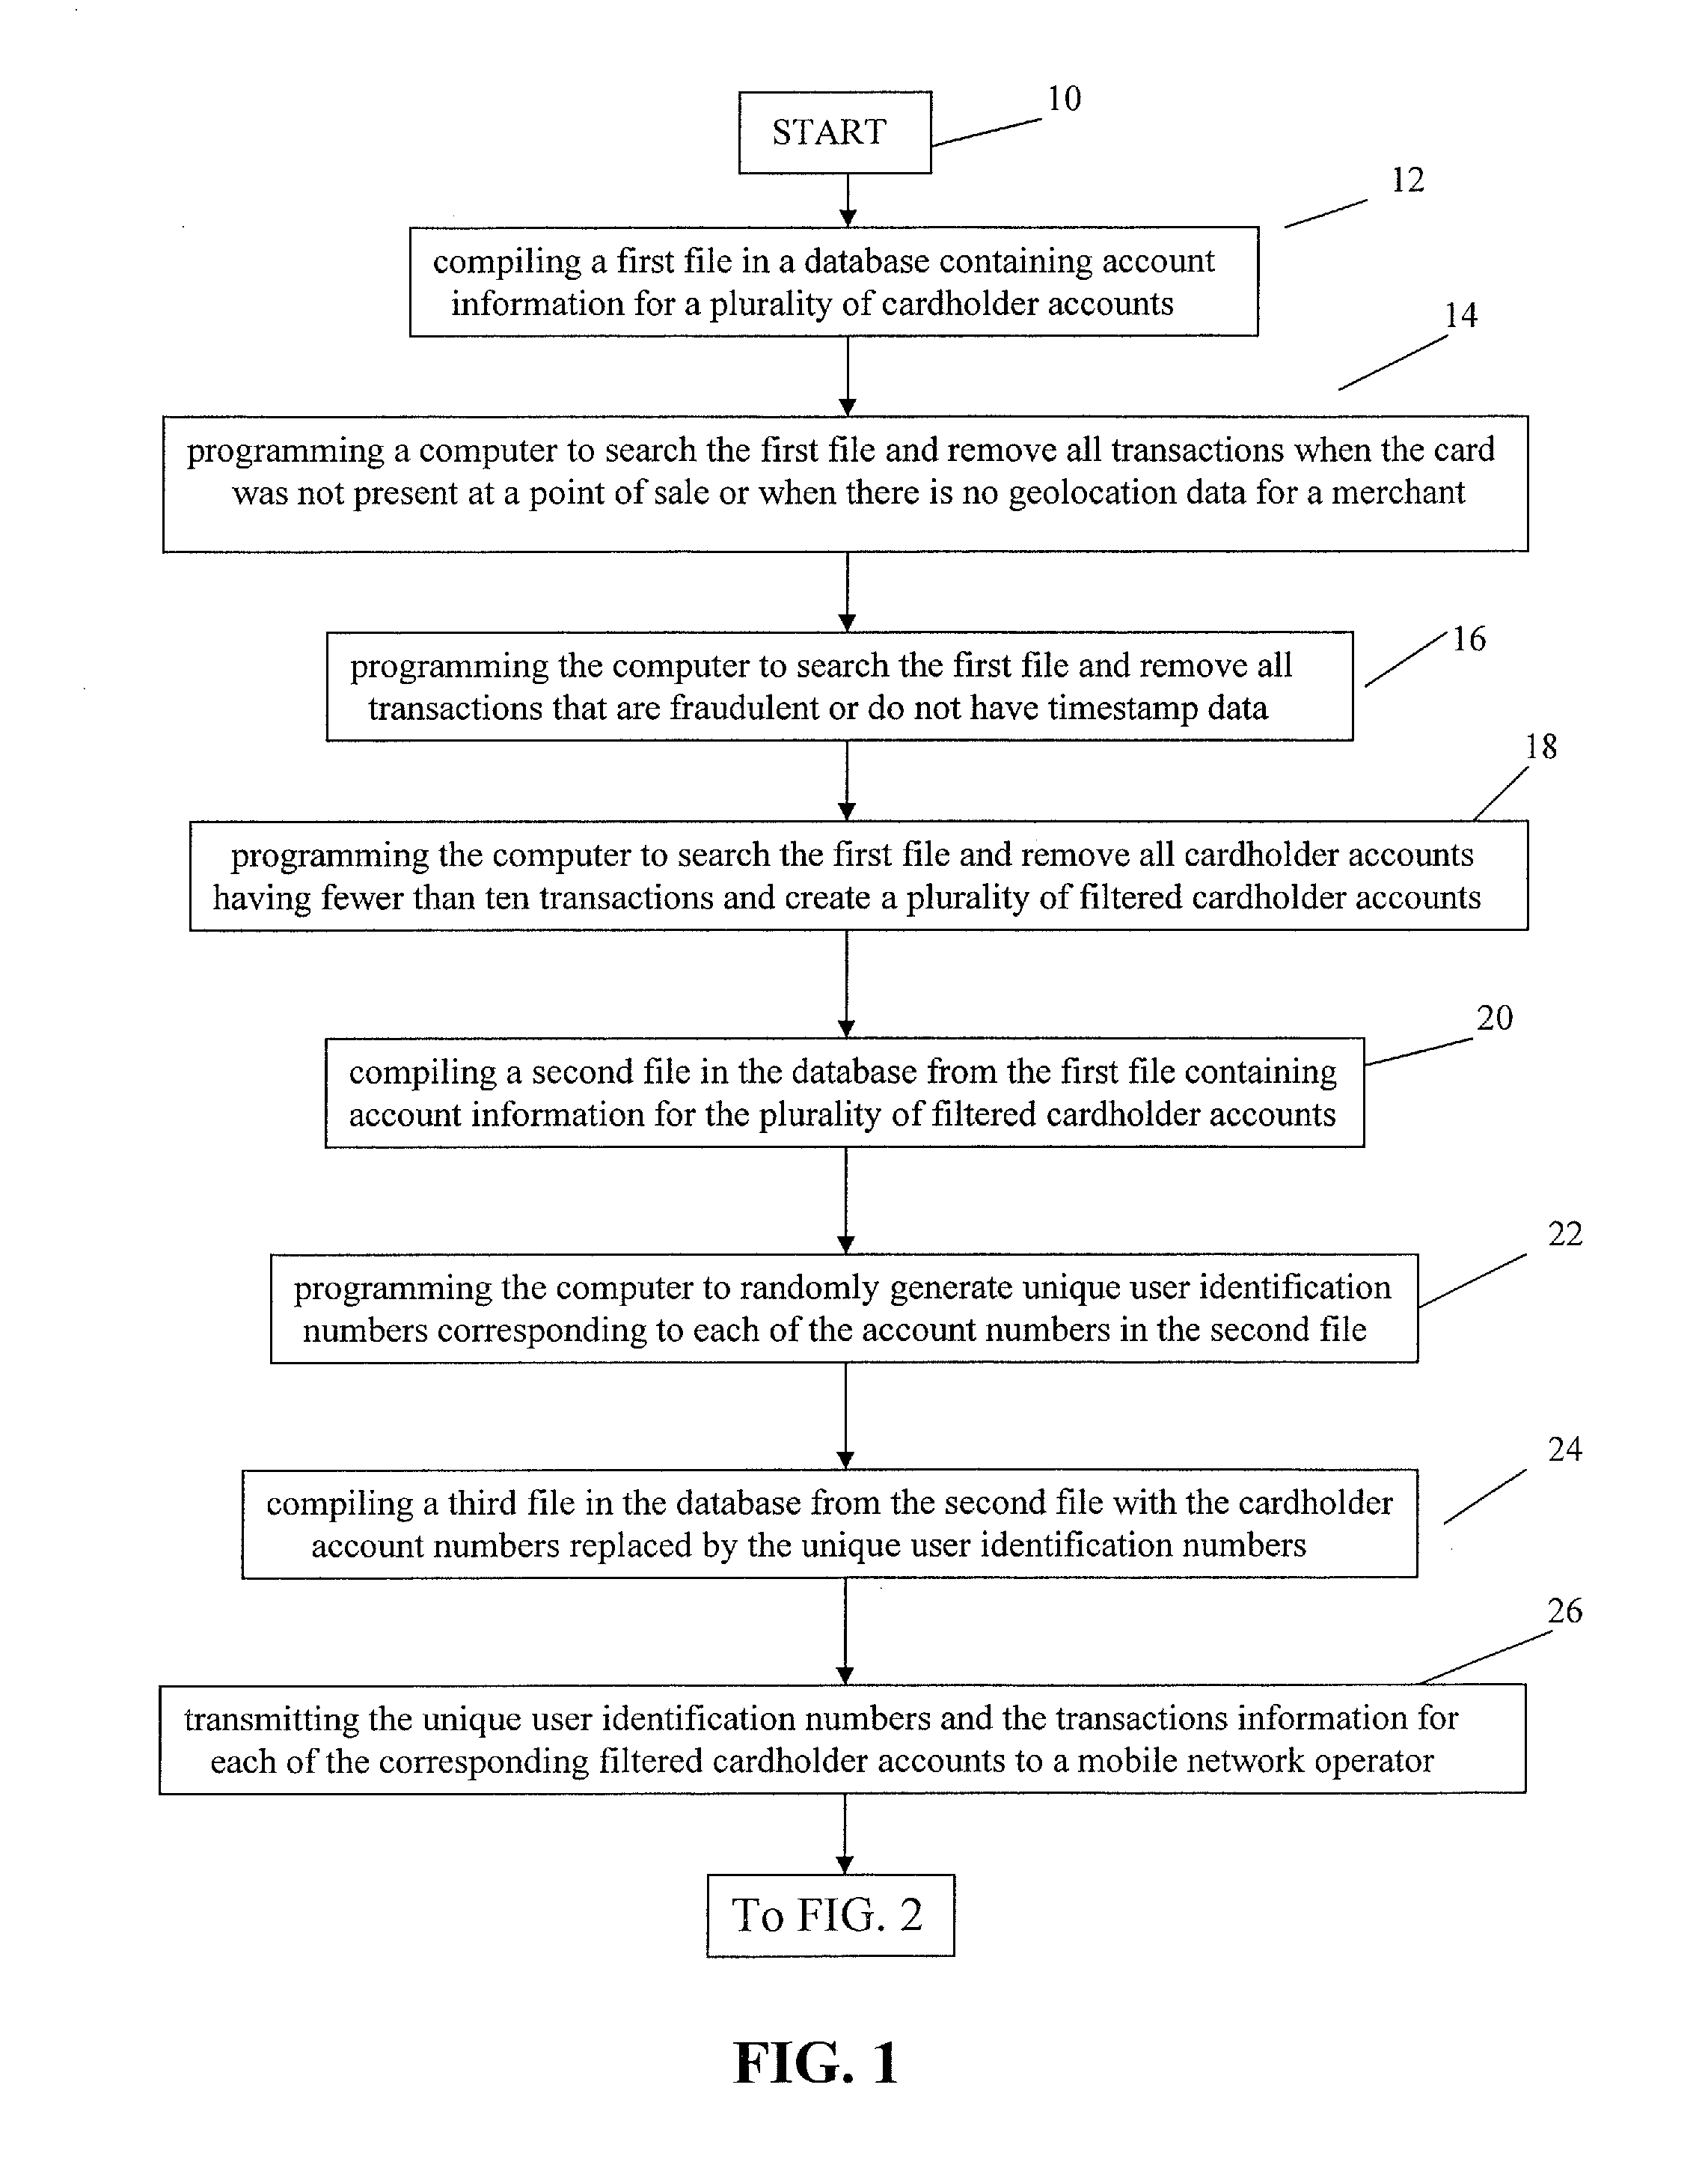 Method for Providing Payment Card Security Using Registrationless Telecom Geolocation Capture